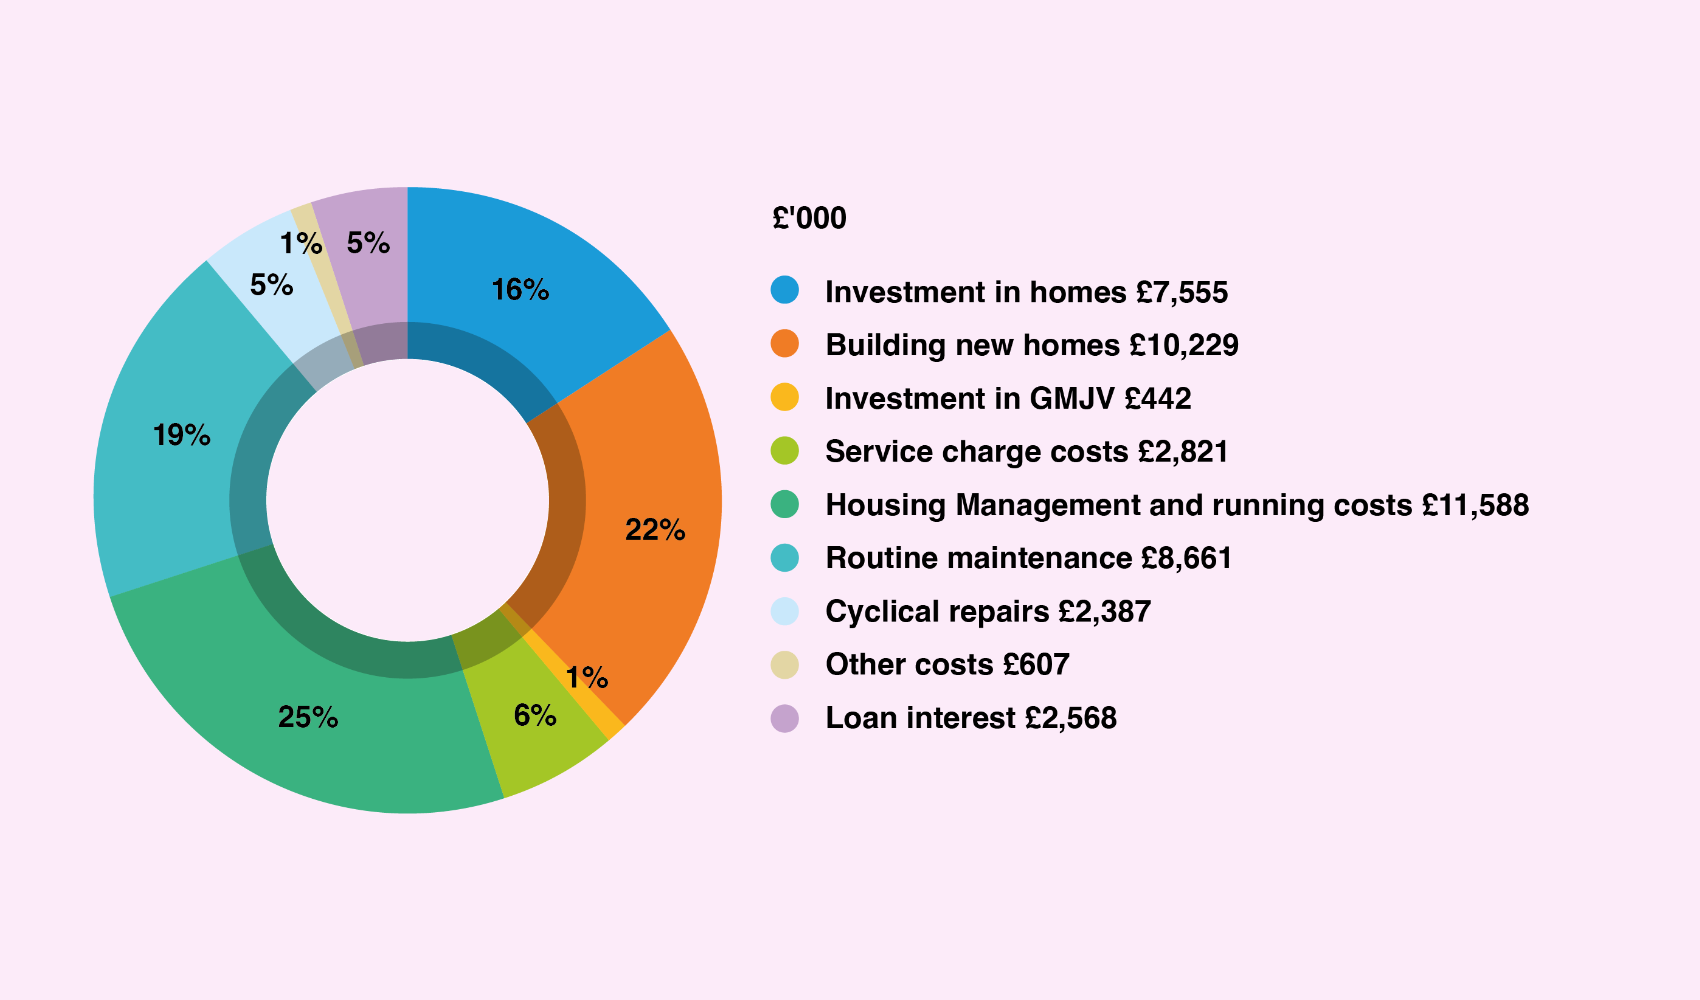 Chart showing a breakdown of how Salix Homes spends its income